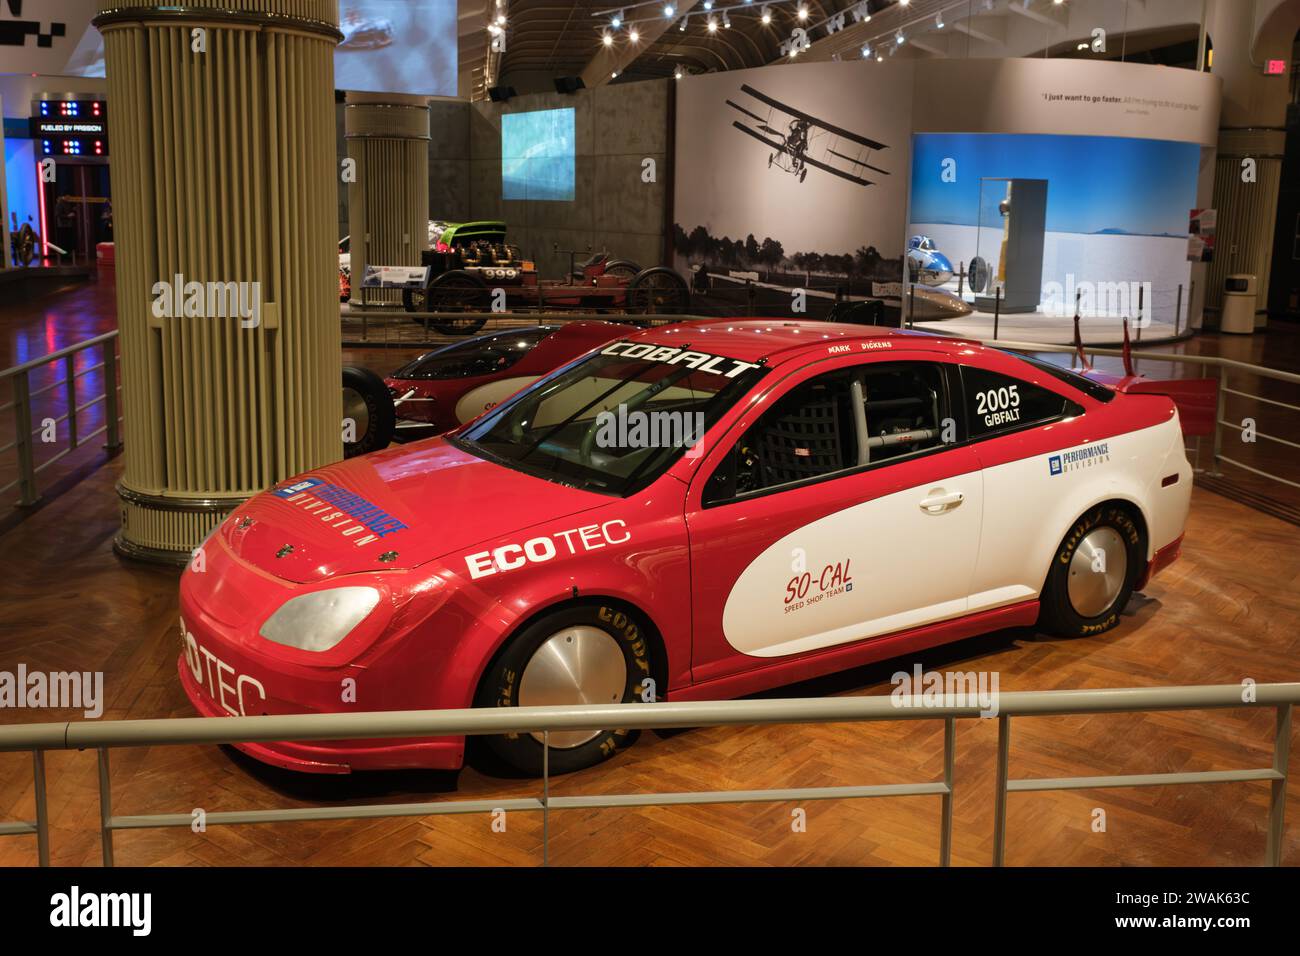 2004 Chevrolet Cobalt SS land speed car on display at The Henry Ford Museum of American Innovation, Dearborn Michigan USA Stock Photo